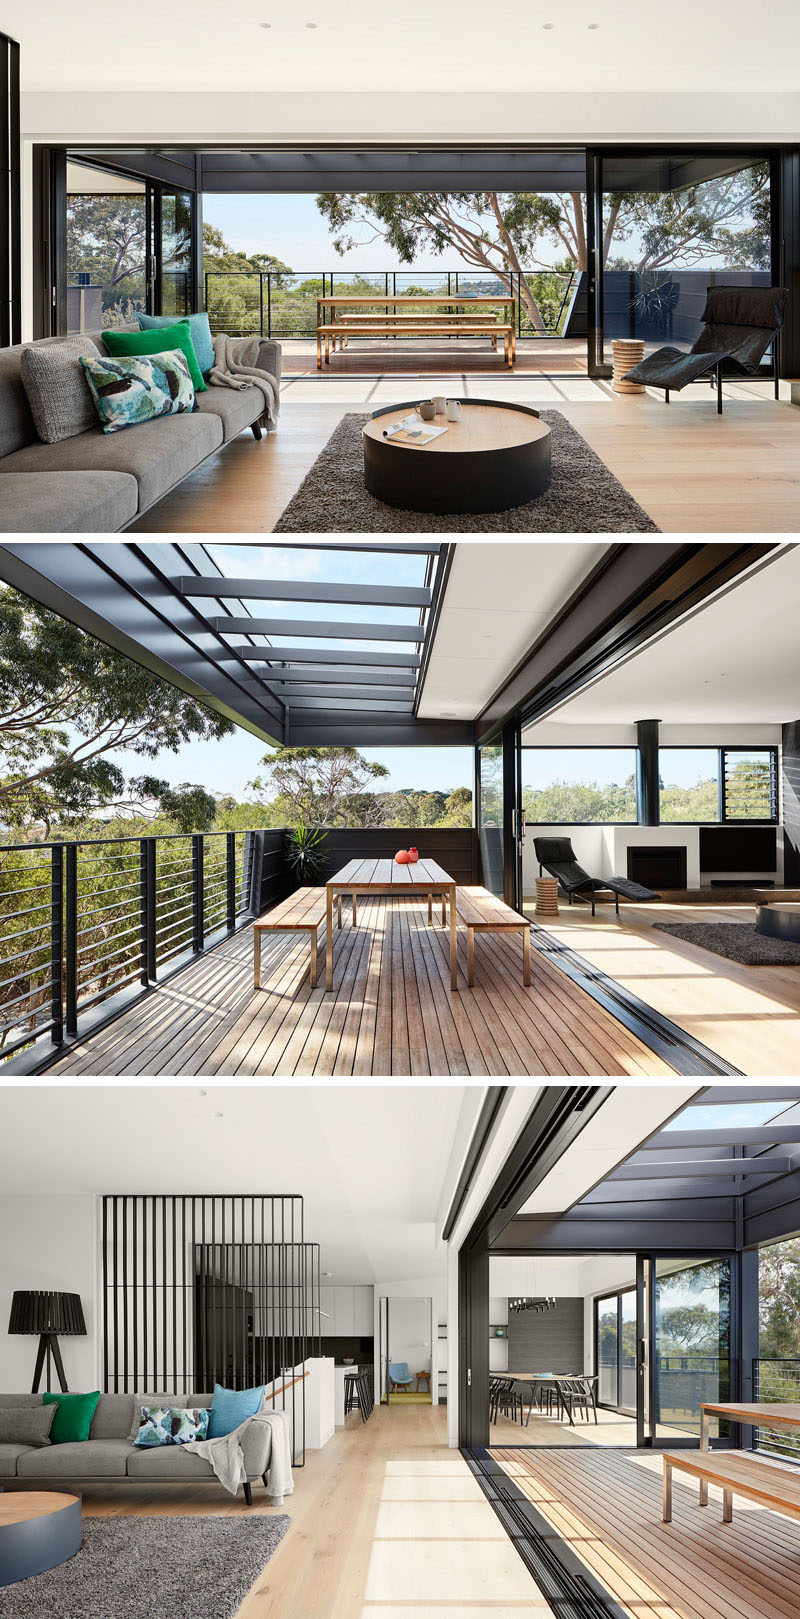 The living area of this Australian home opens up to the balcony with views of the surrounding area, making it a great space for indoor/outdoor living and entertaining.